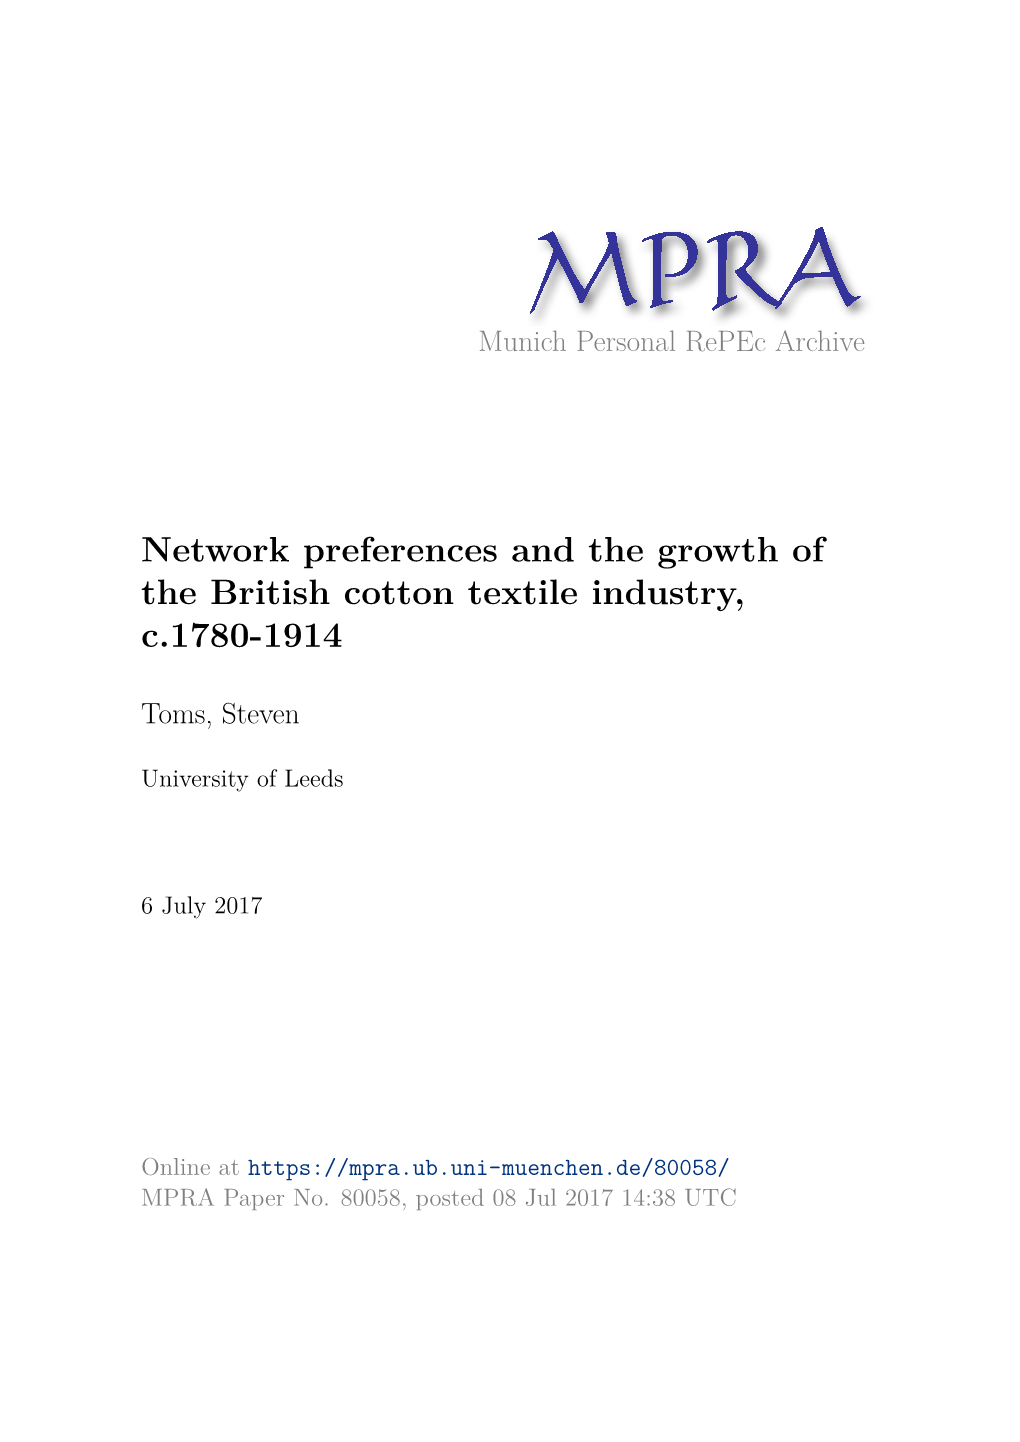 Network Preferences and the Growth of the British Cotton Textile Industry, C.1780-1914